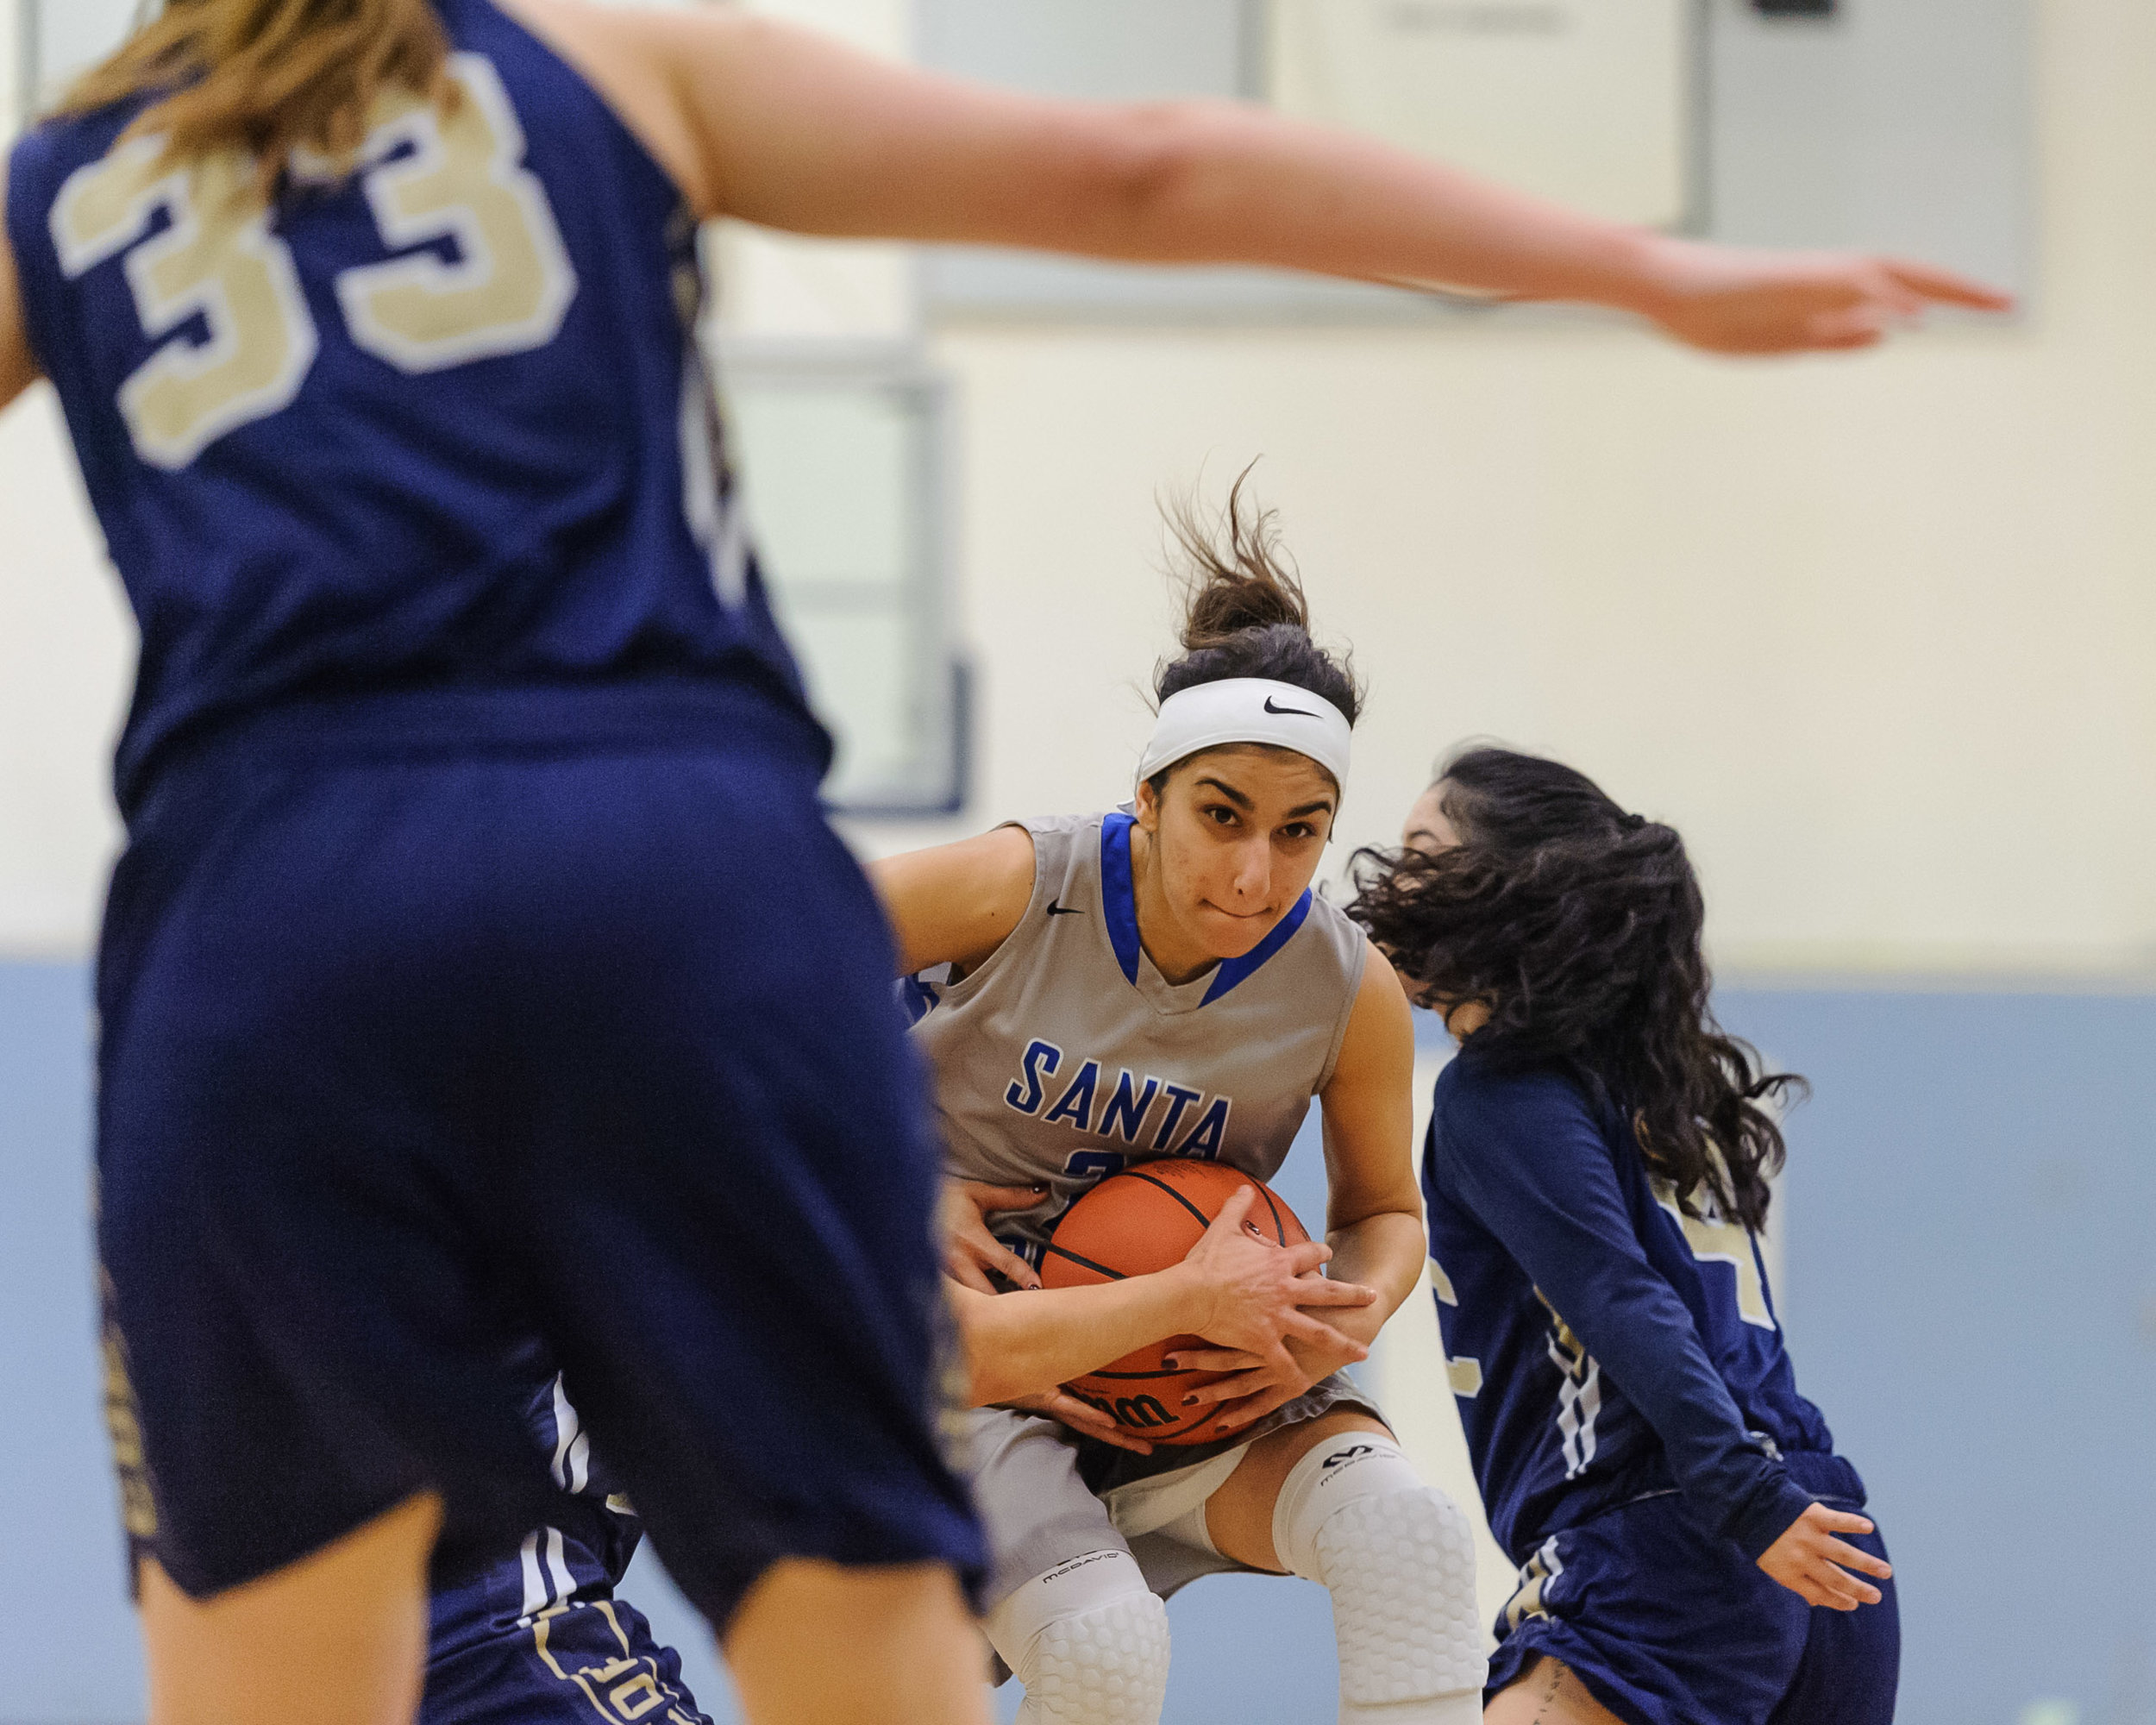  Guard Jessica Melamed (2,Middle) of Santa Monica College attempts to split a double team to get into the lane. The Santa Monica College Corsairs lose the game 108-70 to the College of the Canyons Cougars. The game was held at the SMC Pavilion at the